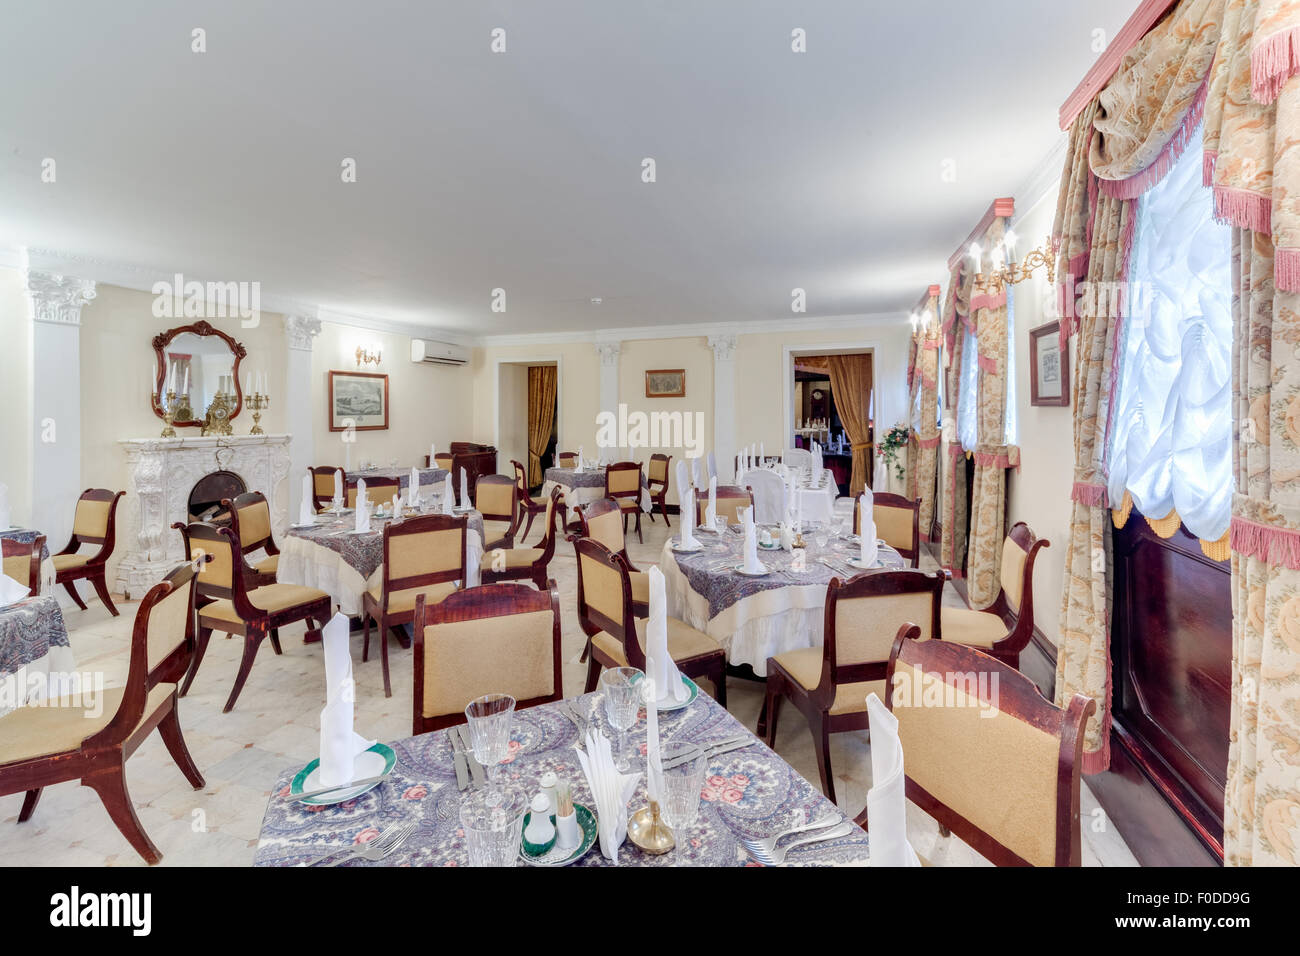 The interior of the restaurant of Russian cuisine "Demidov". The restaurant is located on the Fontanka River in Saint Petersburg Stock Photo